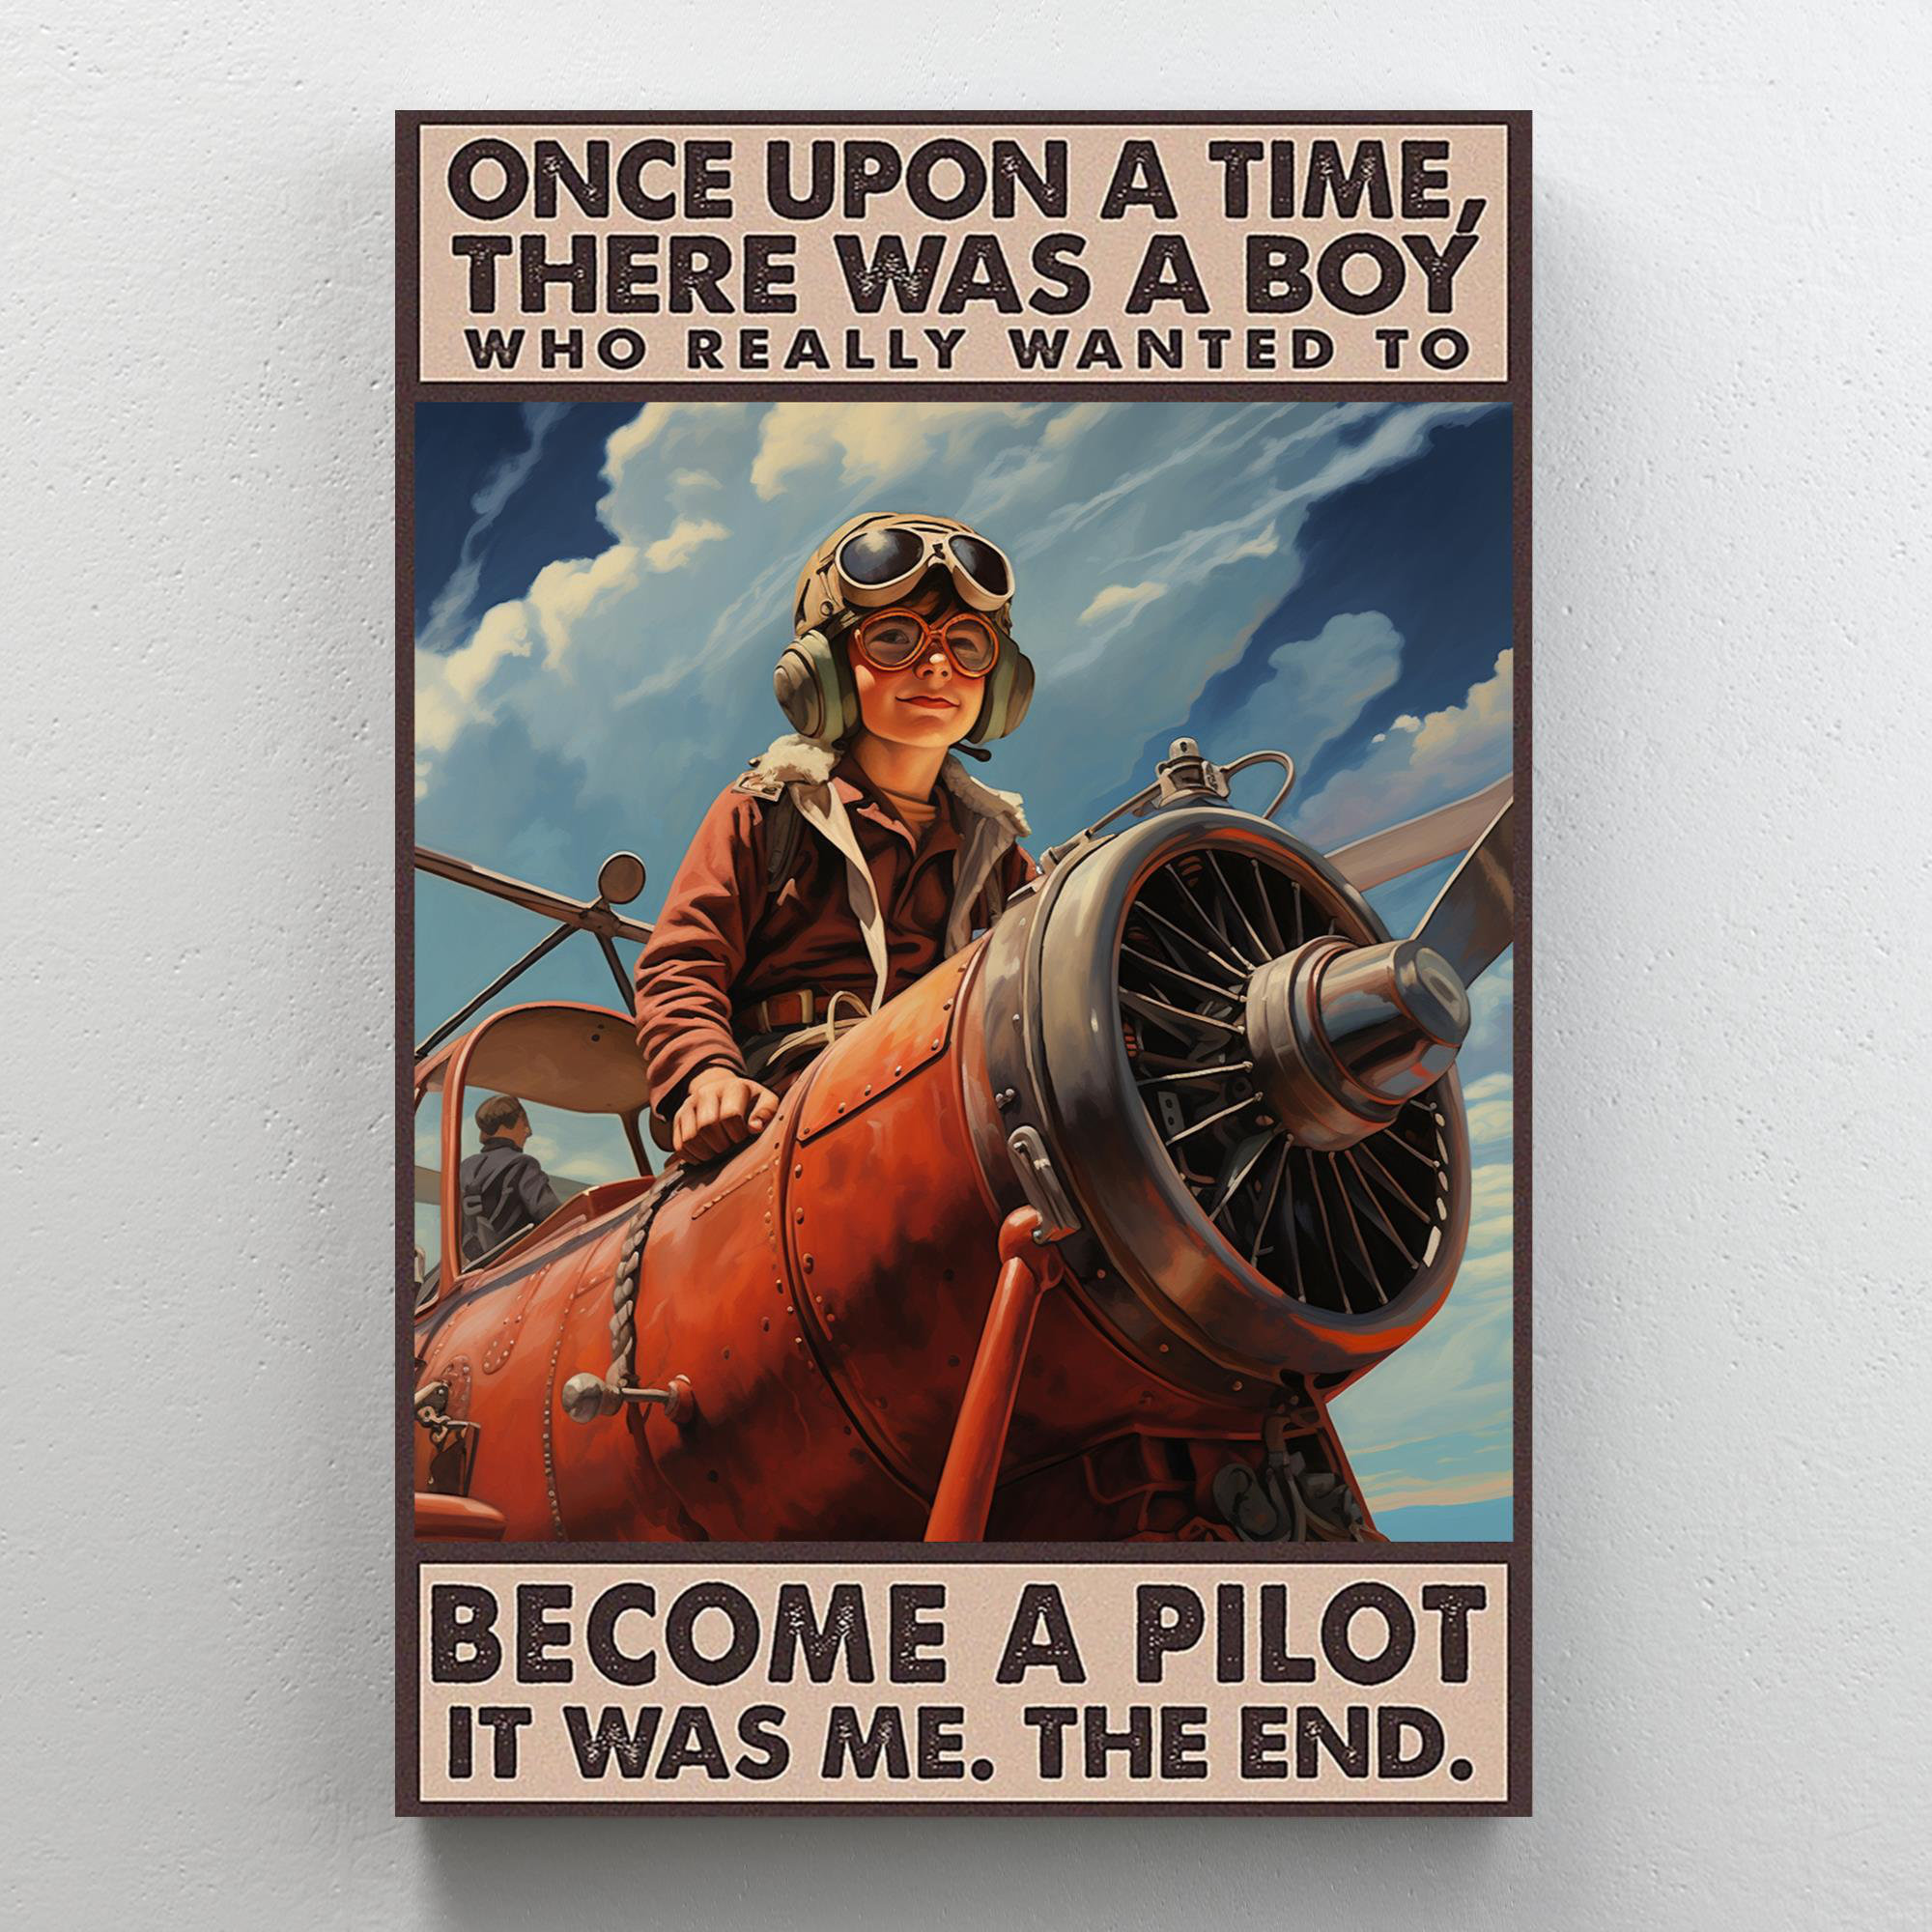 Koan A Boy to Become A Pilot - 1 Piece Rectangle Graphic Art Print on Wrapped Canvas on Canvas Graphic Art Trinx Size: 36 H x 24 W